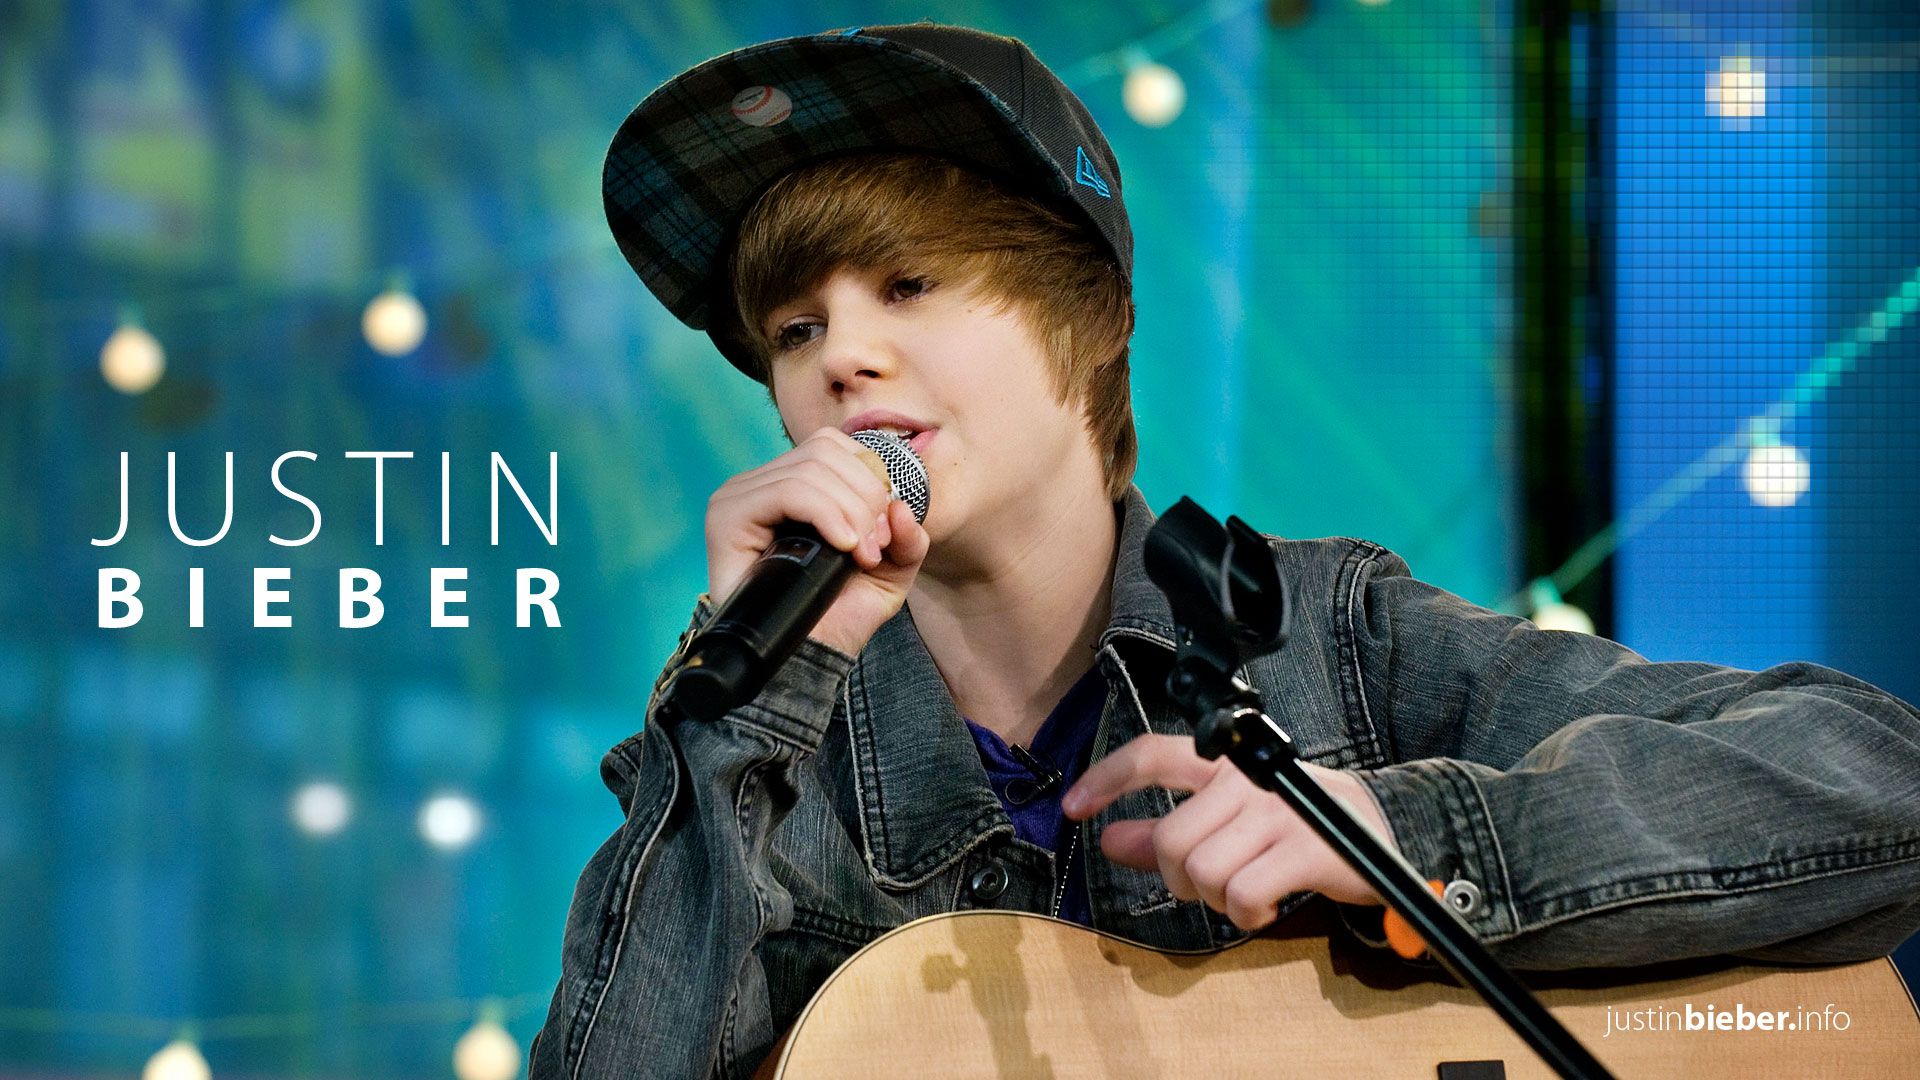 Justin Bieber Wallpaper Collection For